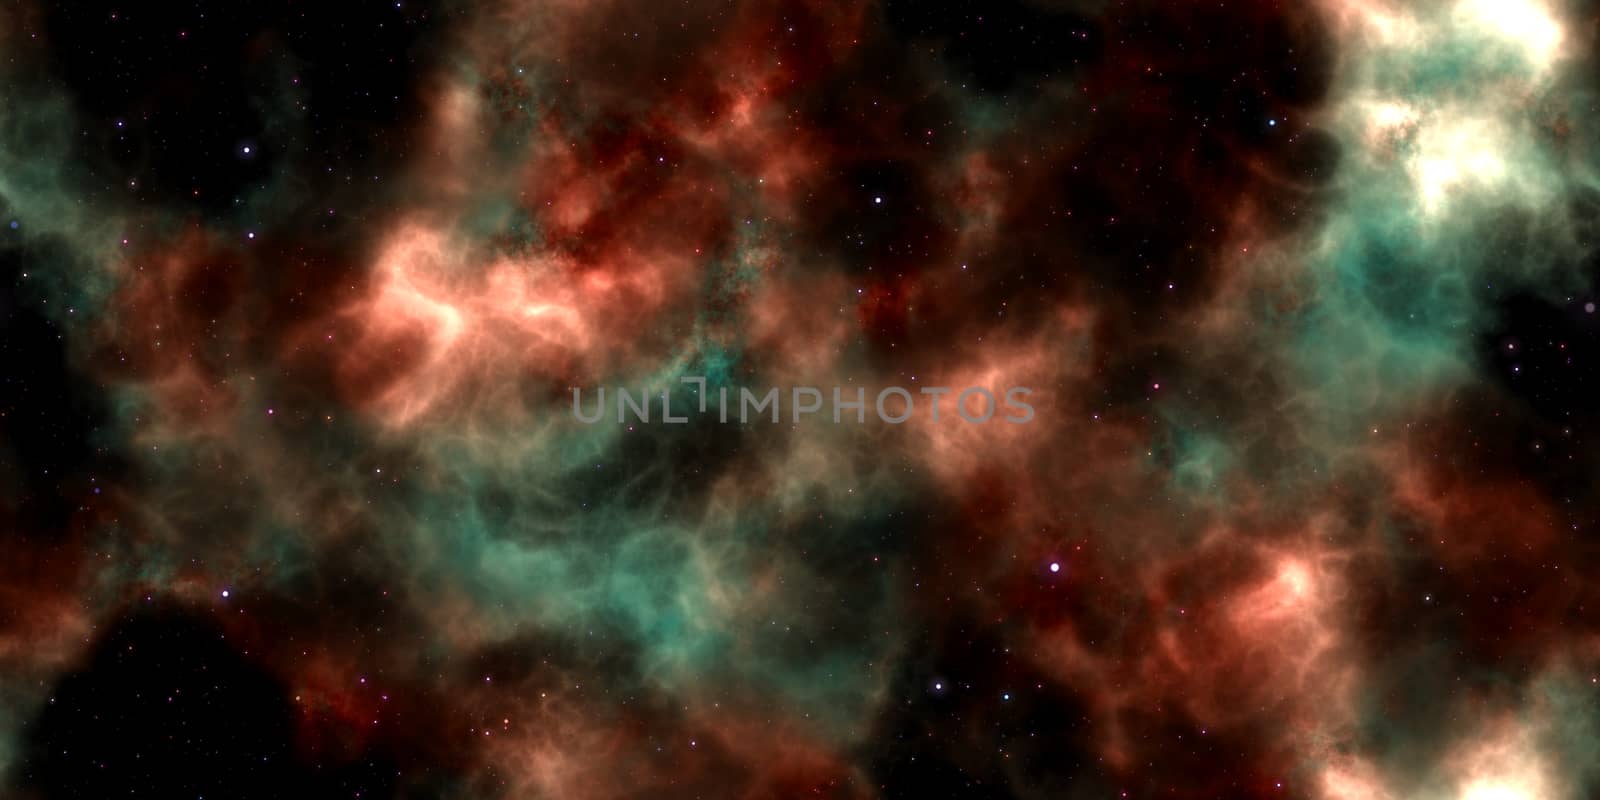 Colored Starry Clouds on Night Sky Galaxy Background. Abstract Cosmos Infinity Texture. 3D Rendering. 3D Illustration. by sanches812